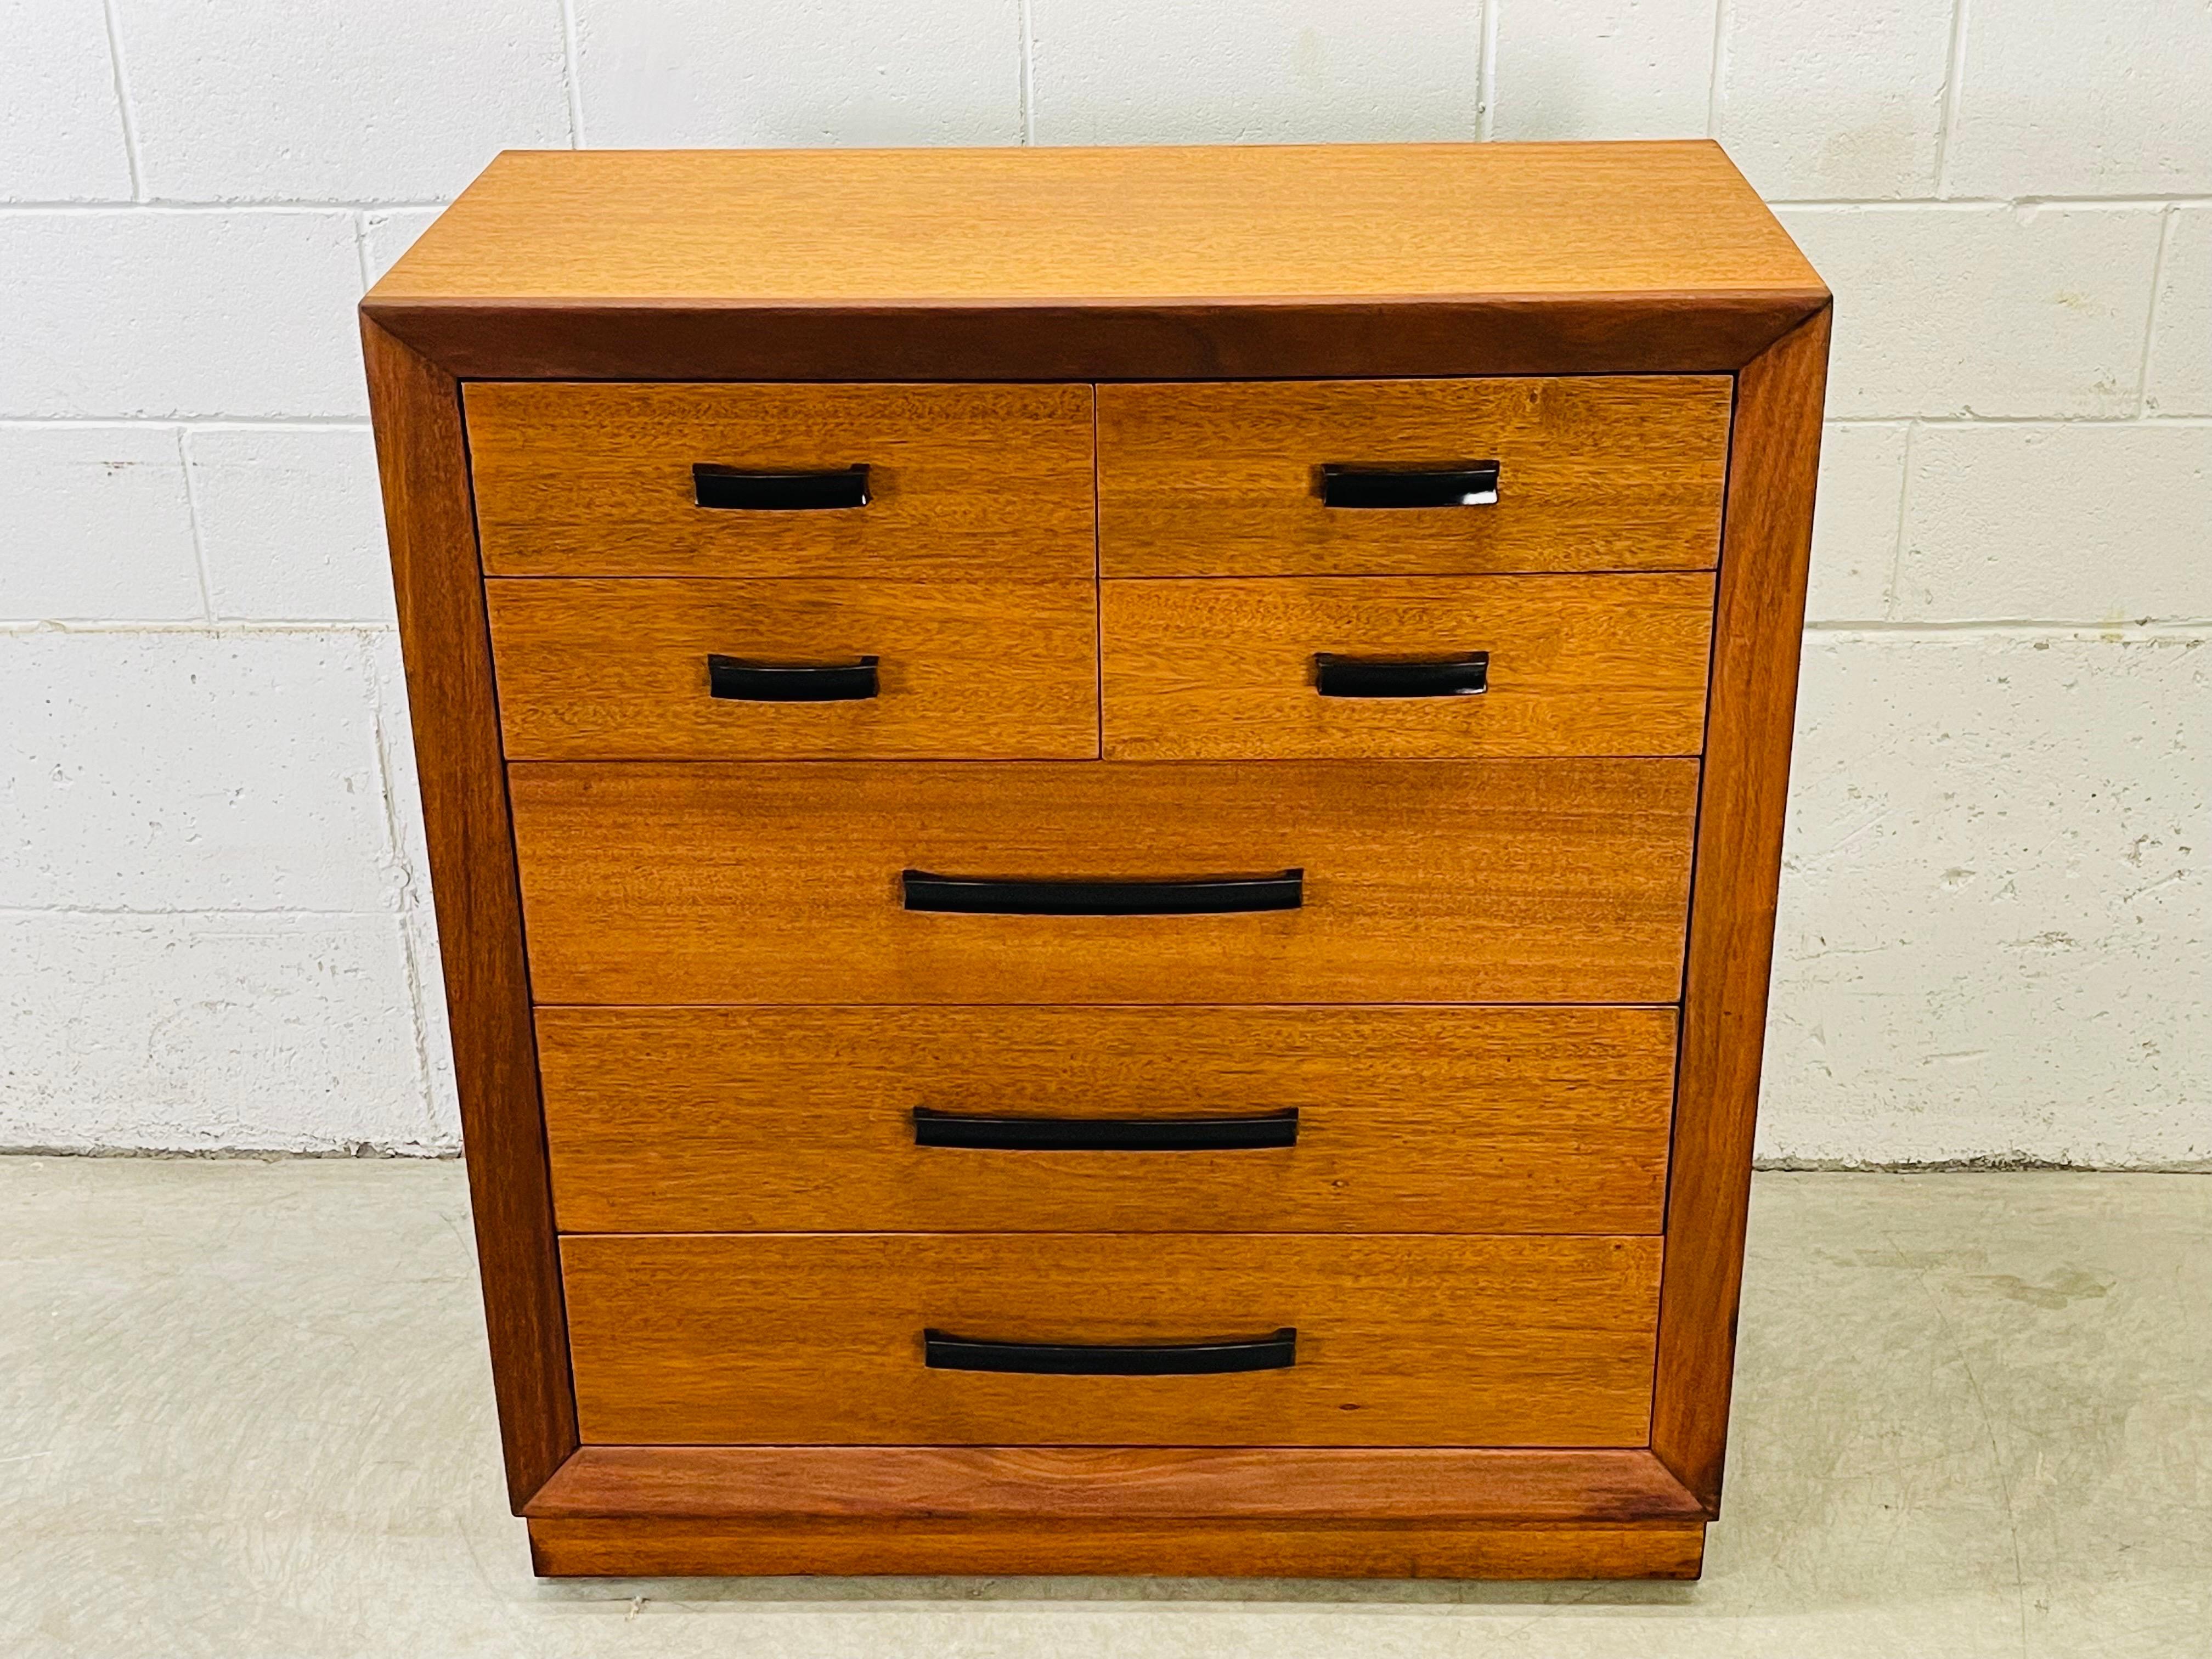 Vintage 1950s John Stuart teak wood seven drawer tall deesser with black metal pulls. The dresser drawers measure from 4”-6”H for lots of storage. The drawer interiors are solid oak wood. Newly refinished condition. Marked in the drawer.